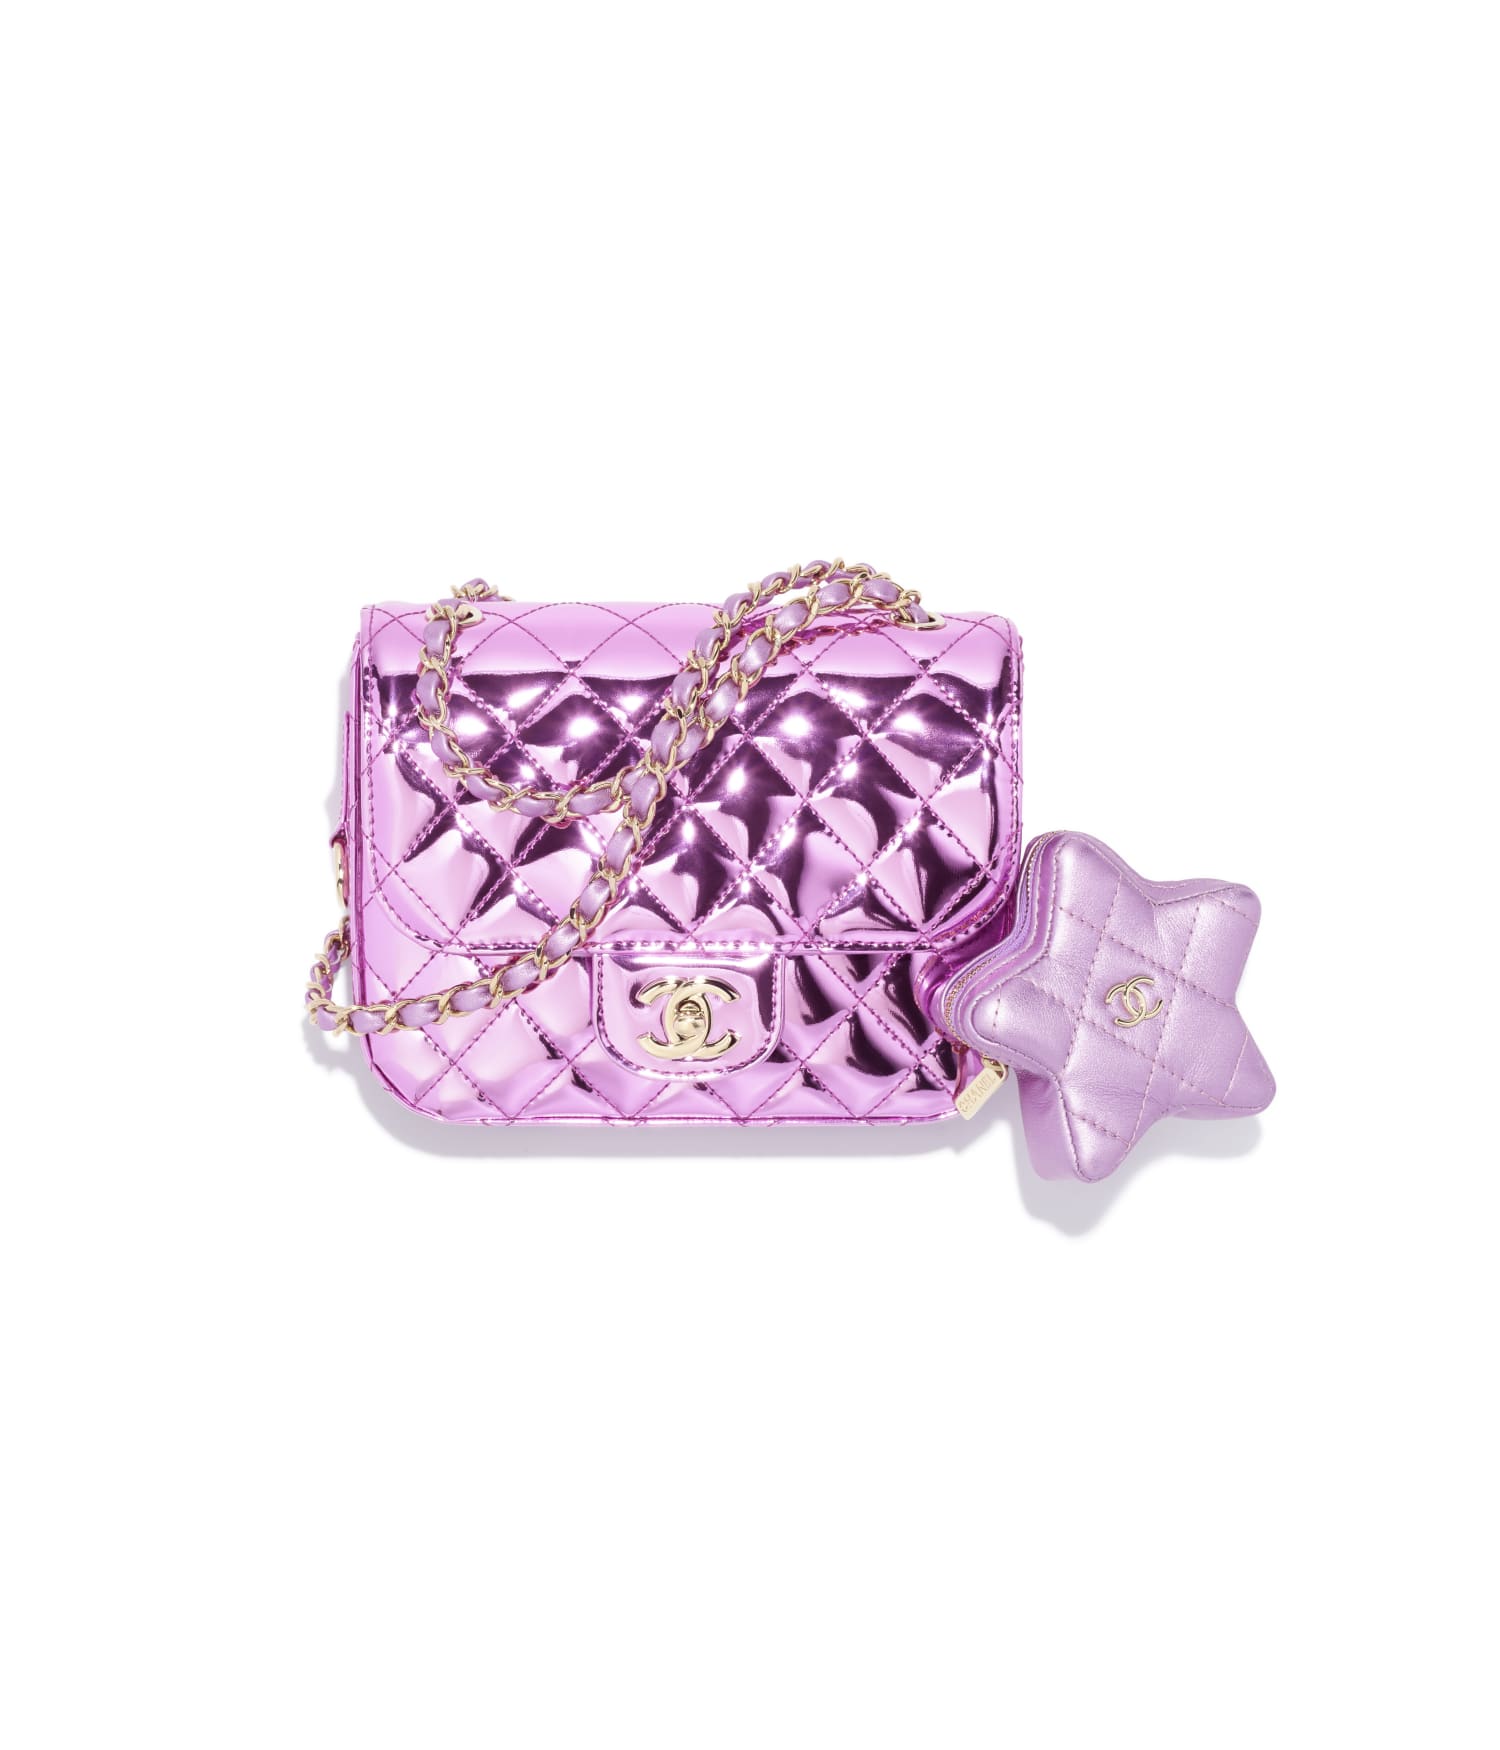 chanel_bag-in-light-purple-mirror-leather-metallic-leather-and-metal-as4647-b14873-nt667-hd-LD